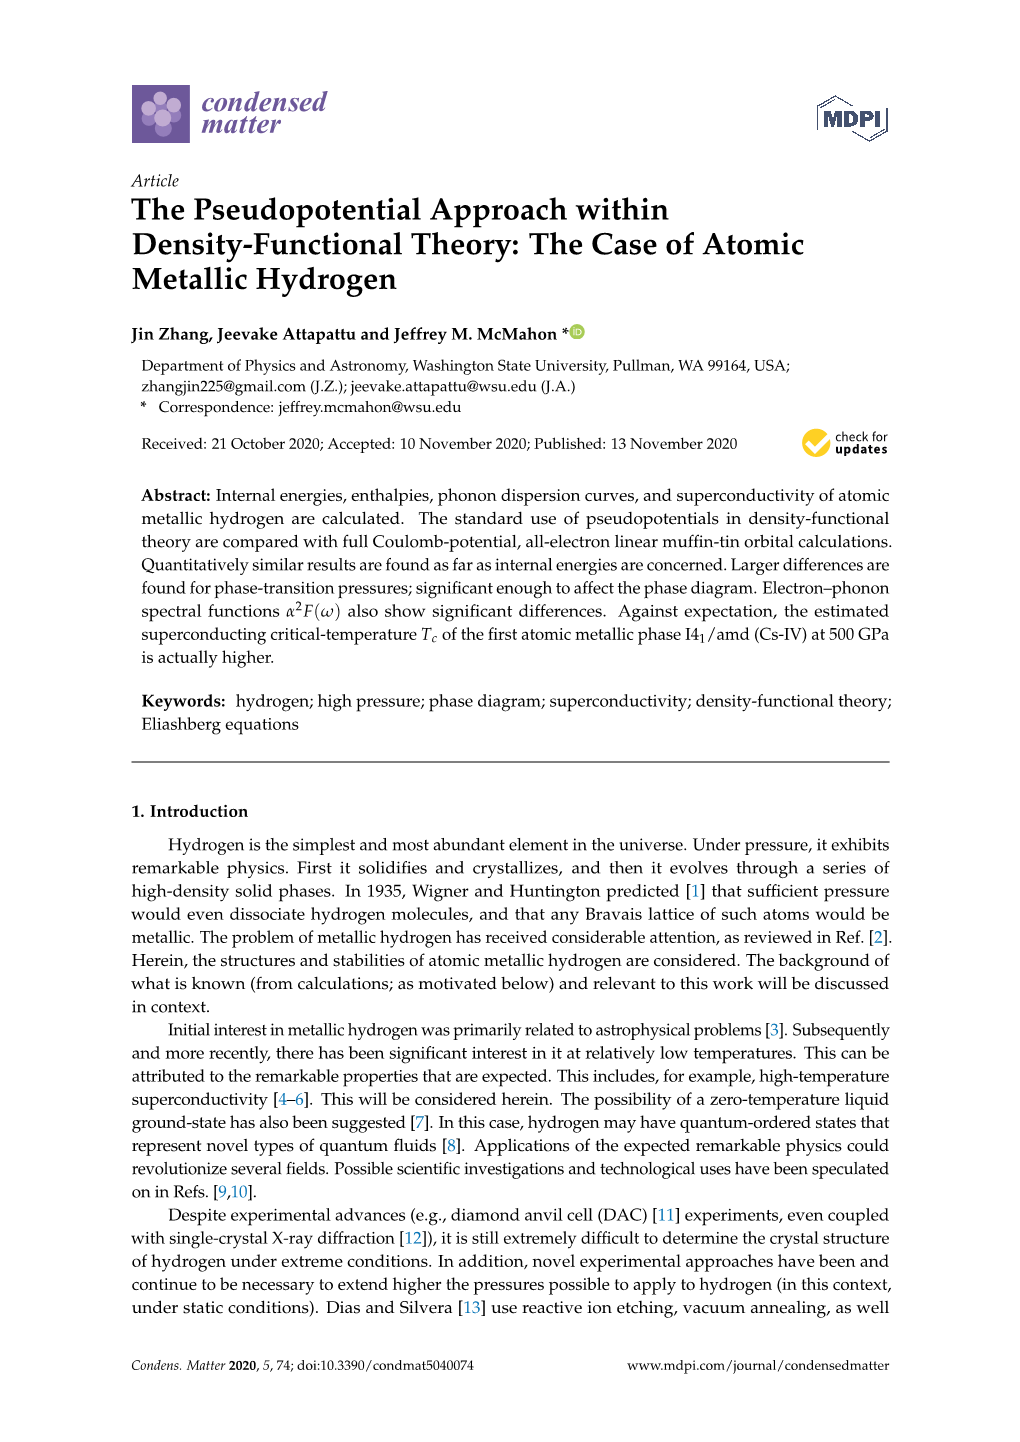 The Pseudopotential Approach Within Density-Functional Theory: the Case of Atomic Metallic Hydrogen